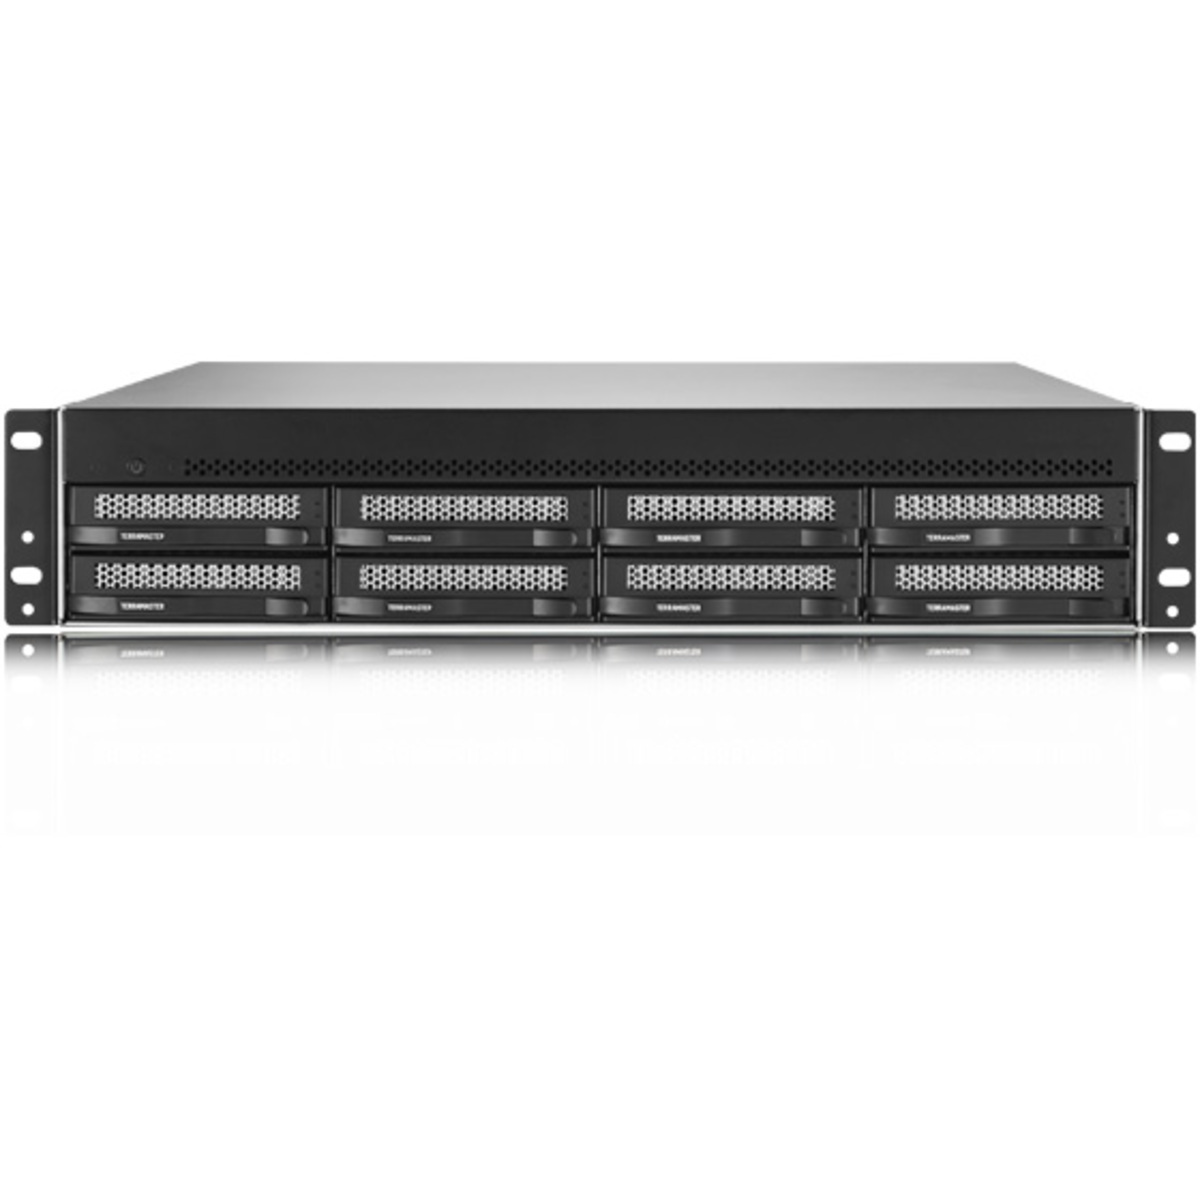 TerraMaster U8-450 8tb 8-Bay RackMount Multimedia / Power User / Business NAS - Network Attached Storage Device 4x2tb Seagate BarraCuda ST2000DM008 3.5 7200rpm SATA 6Gb/s HDD CONSUMER Class Drives Installed - Burn-In Tested U8-450